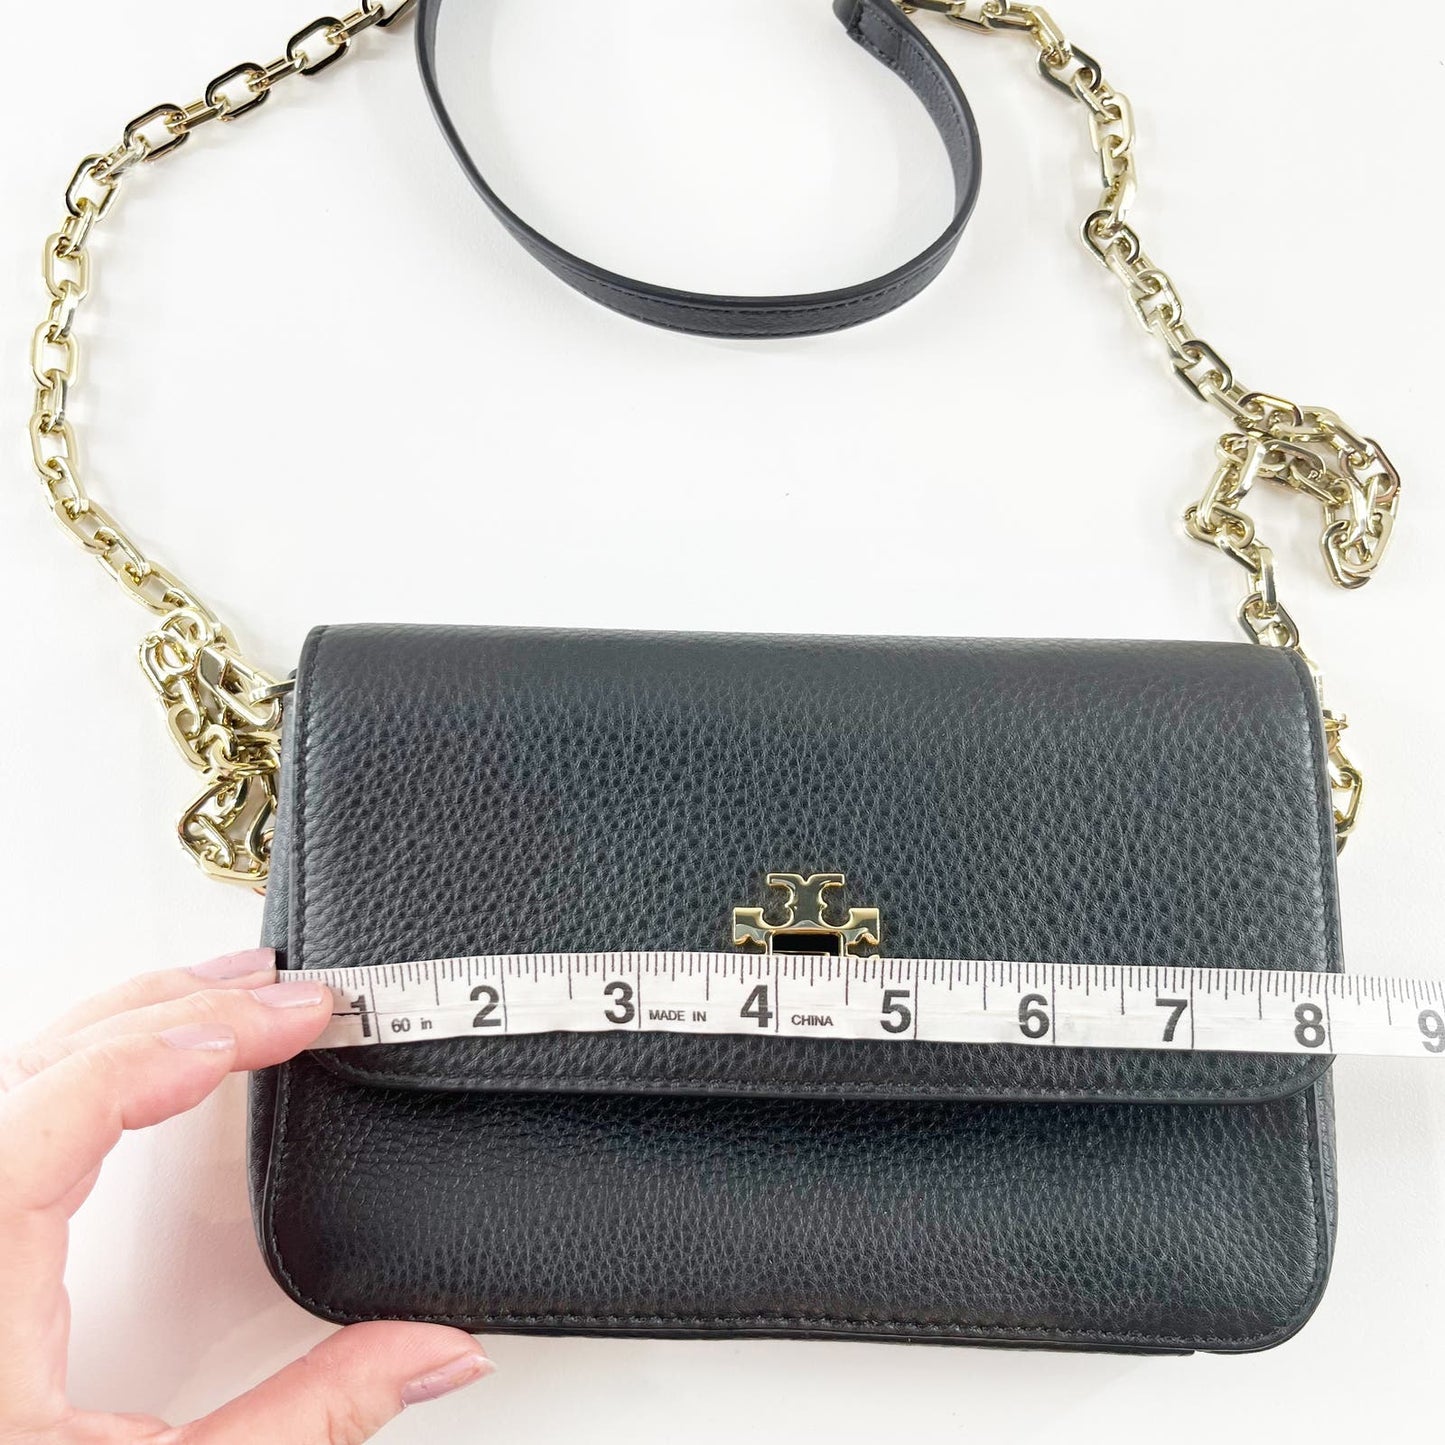 Tory Burch Mercer Pebbled Leather Chain Crossbody Wallet Black Gold